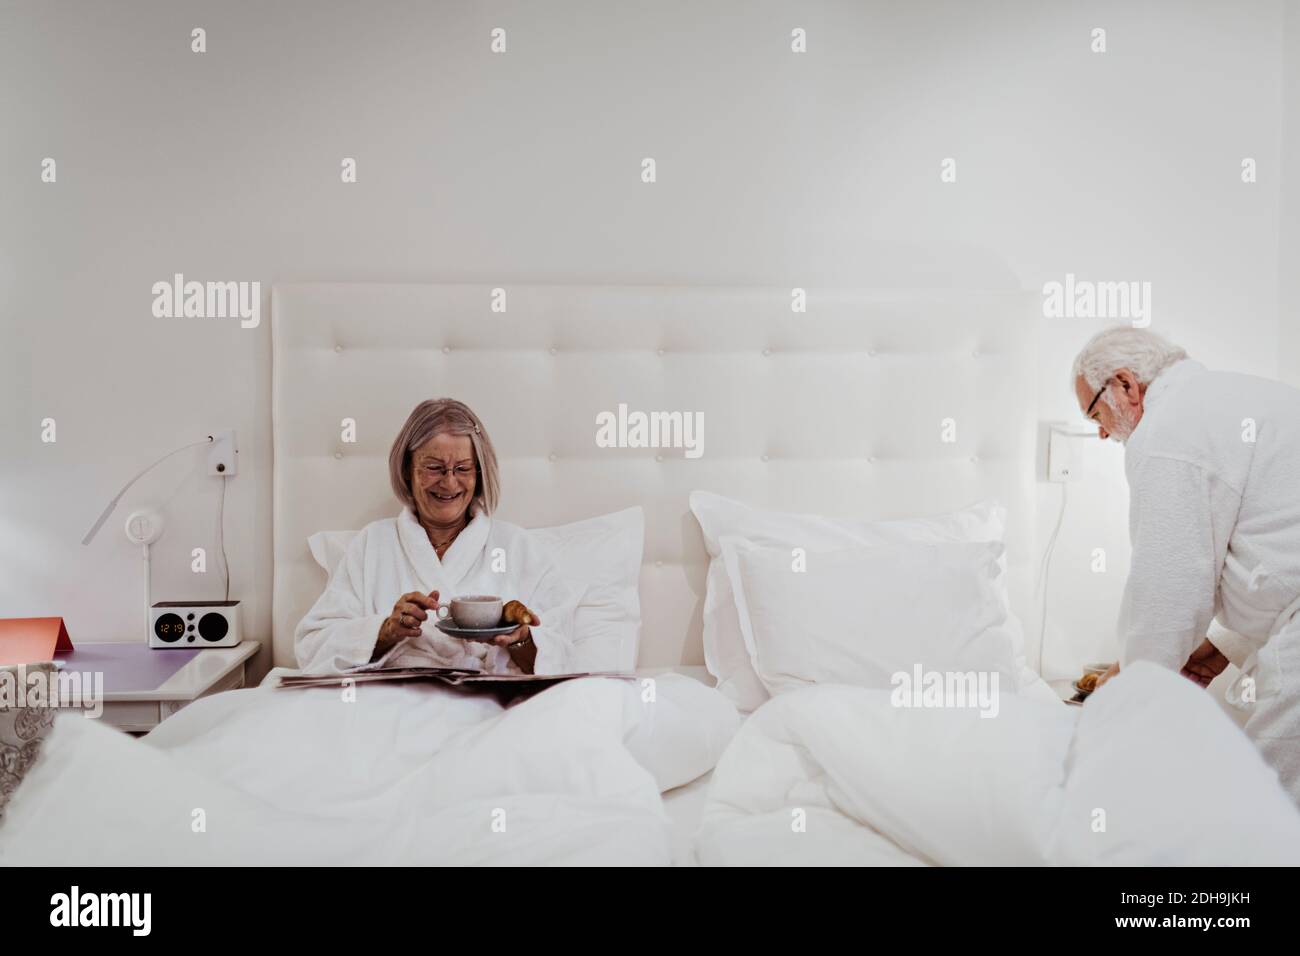 Happy senior woman having coffee while man standing by bed in hotel room Stock Photo